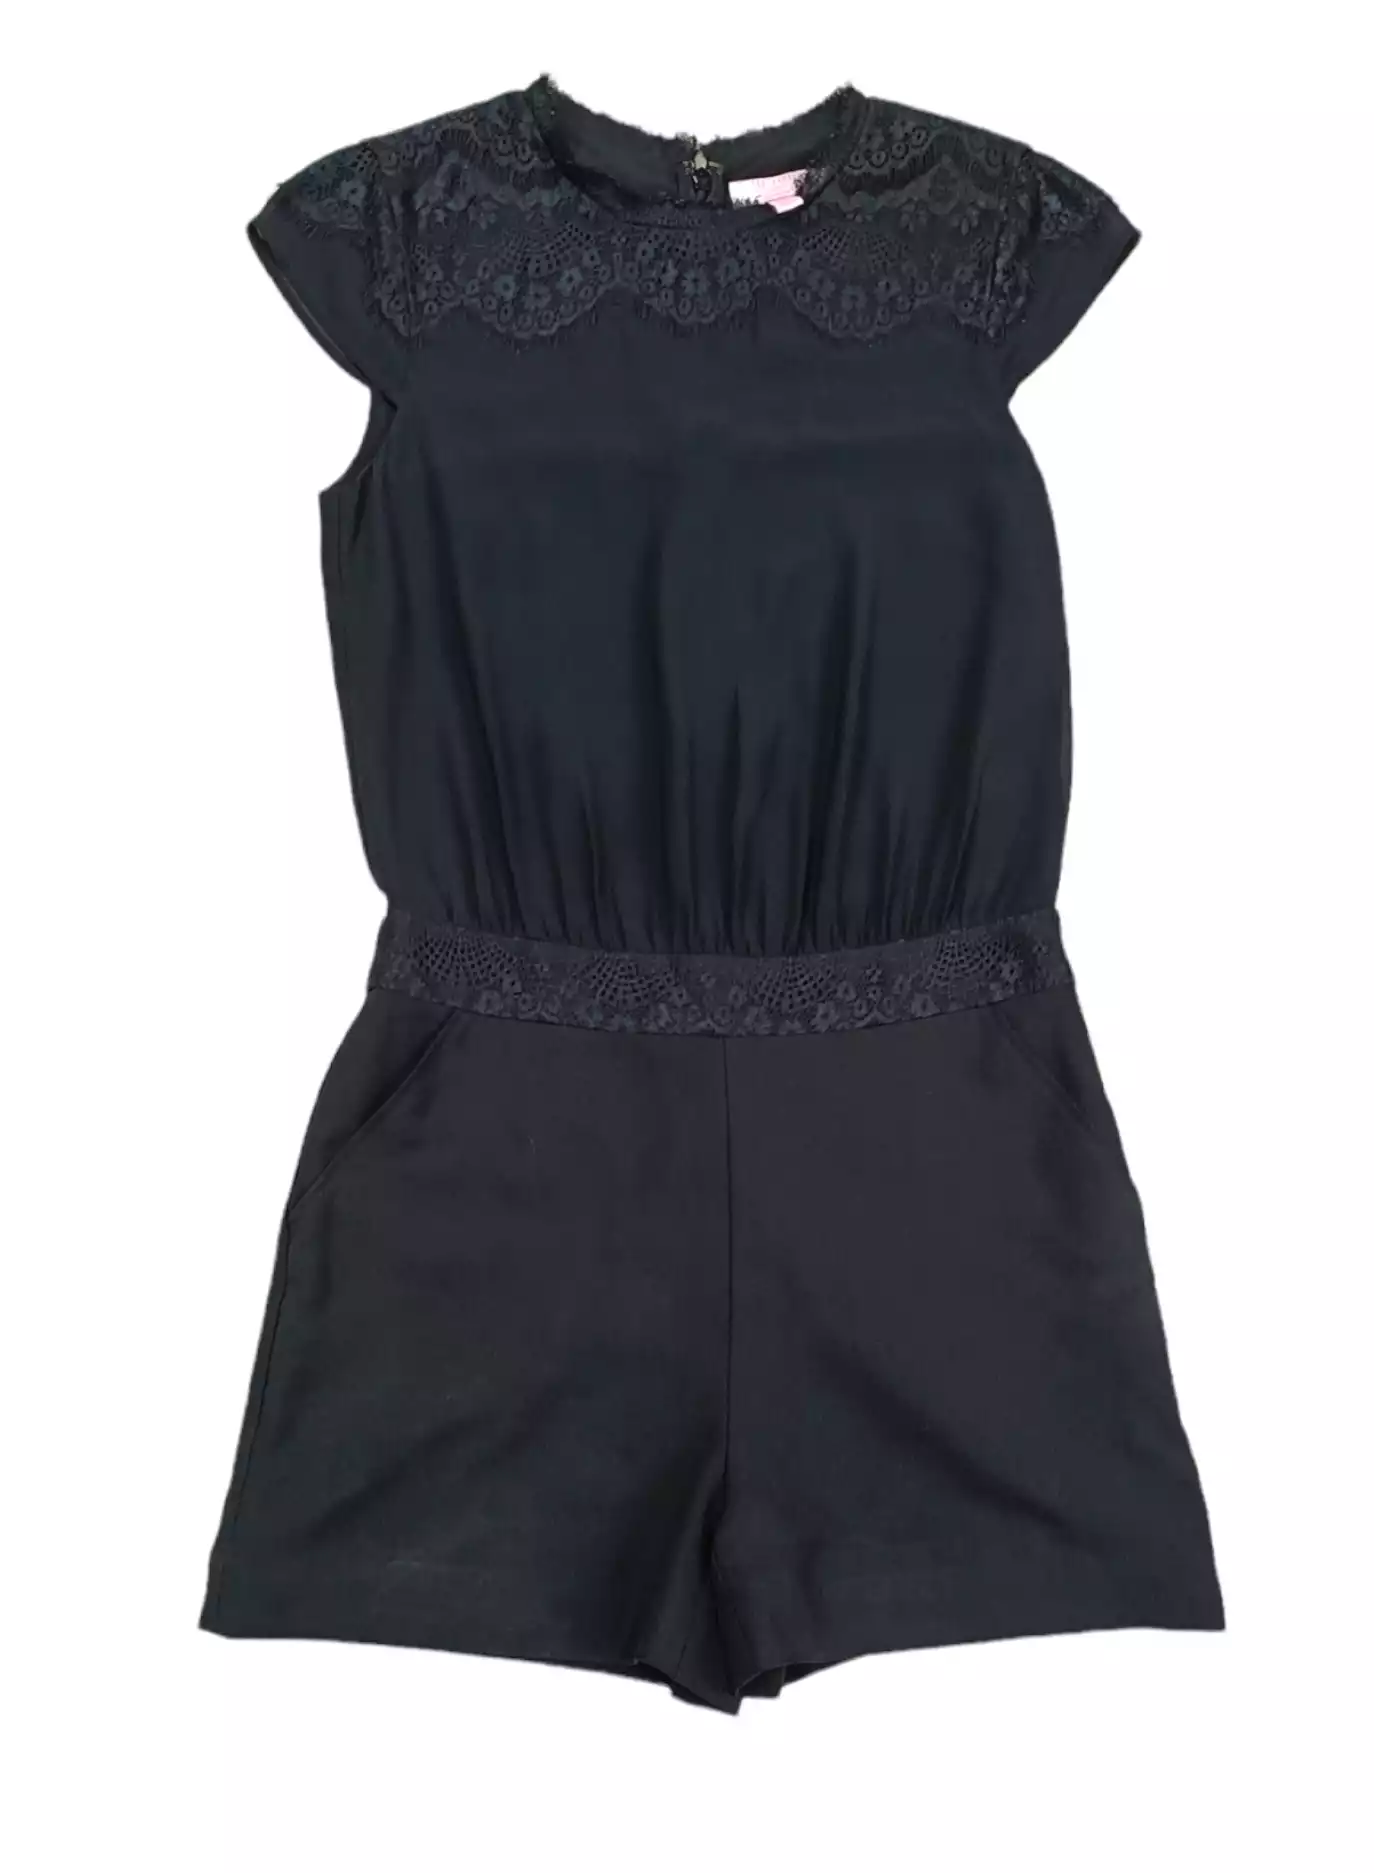 Playsuit by Ted Baker